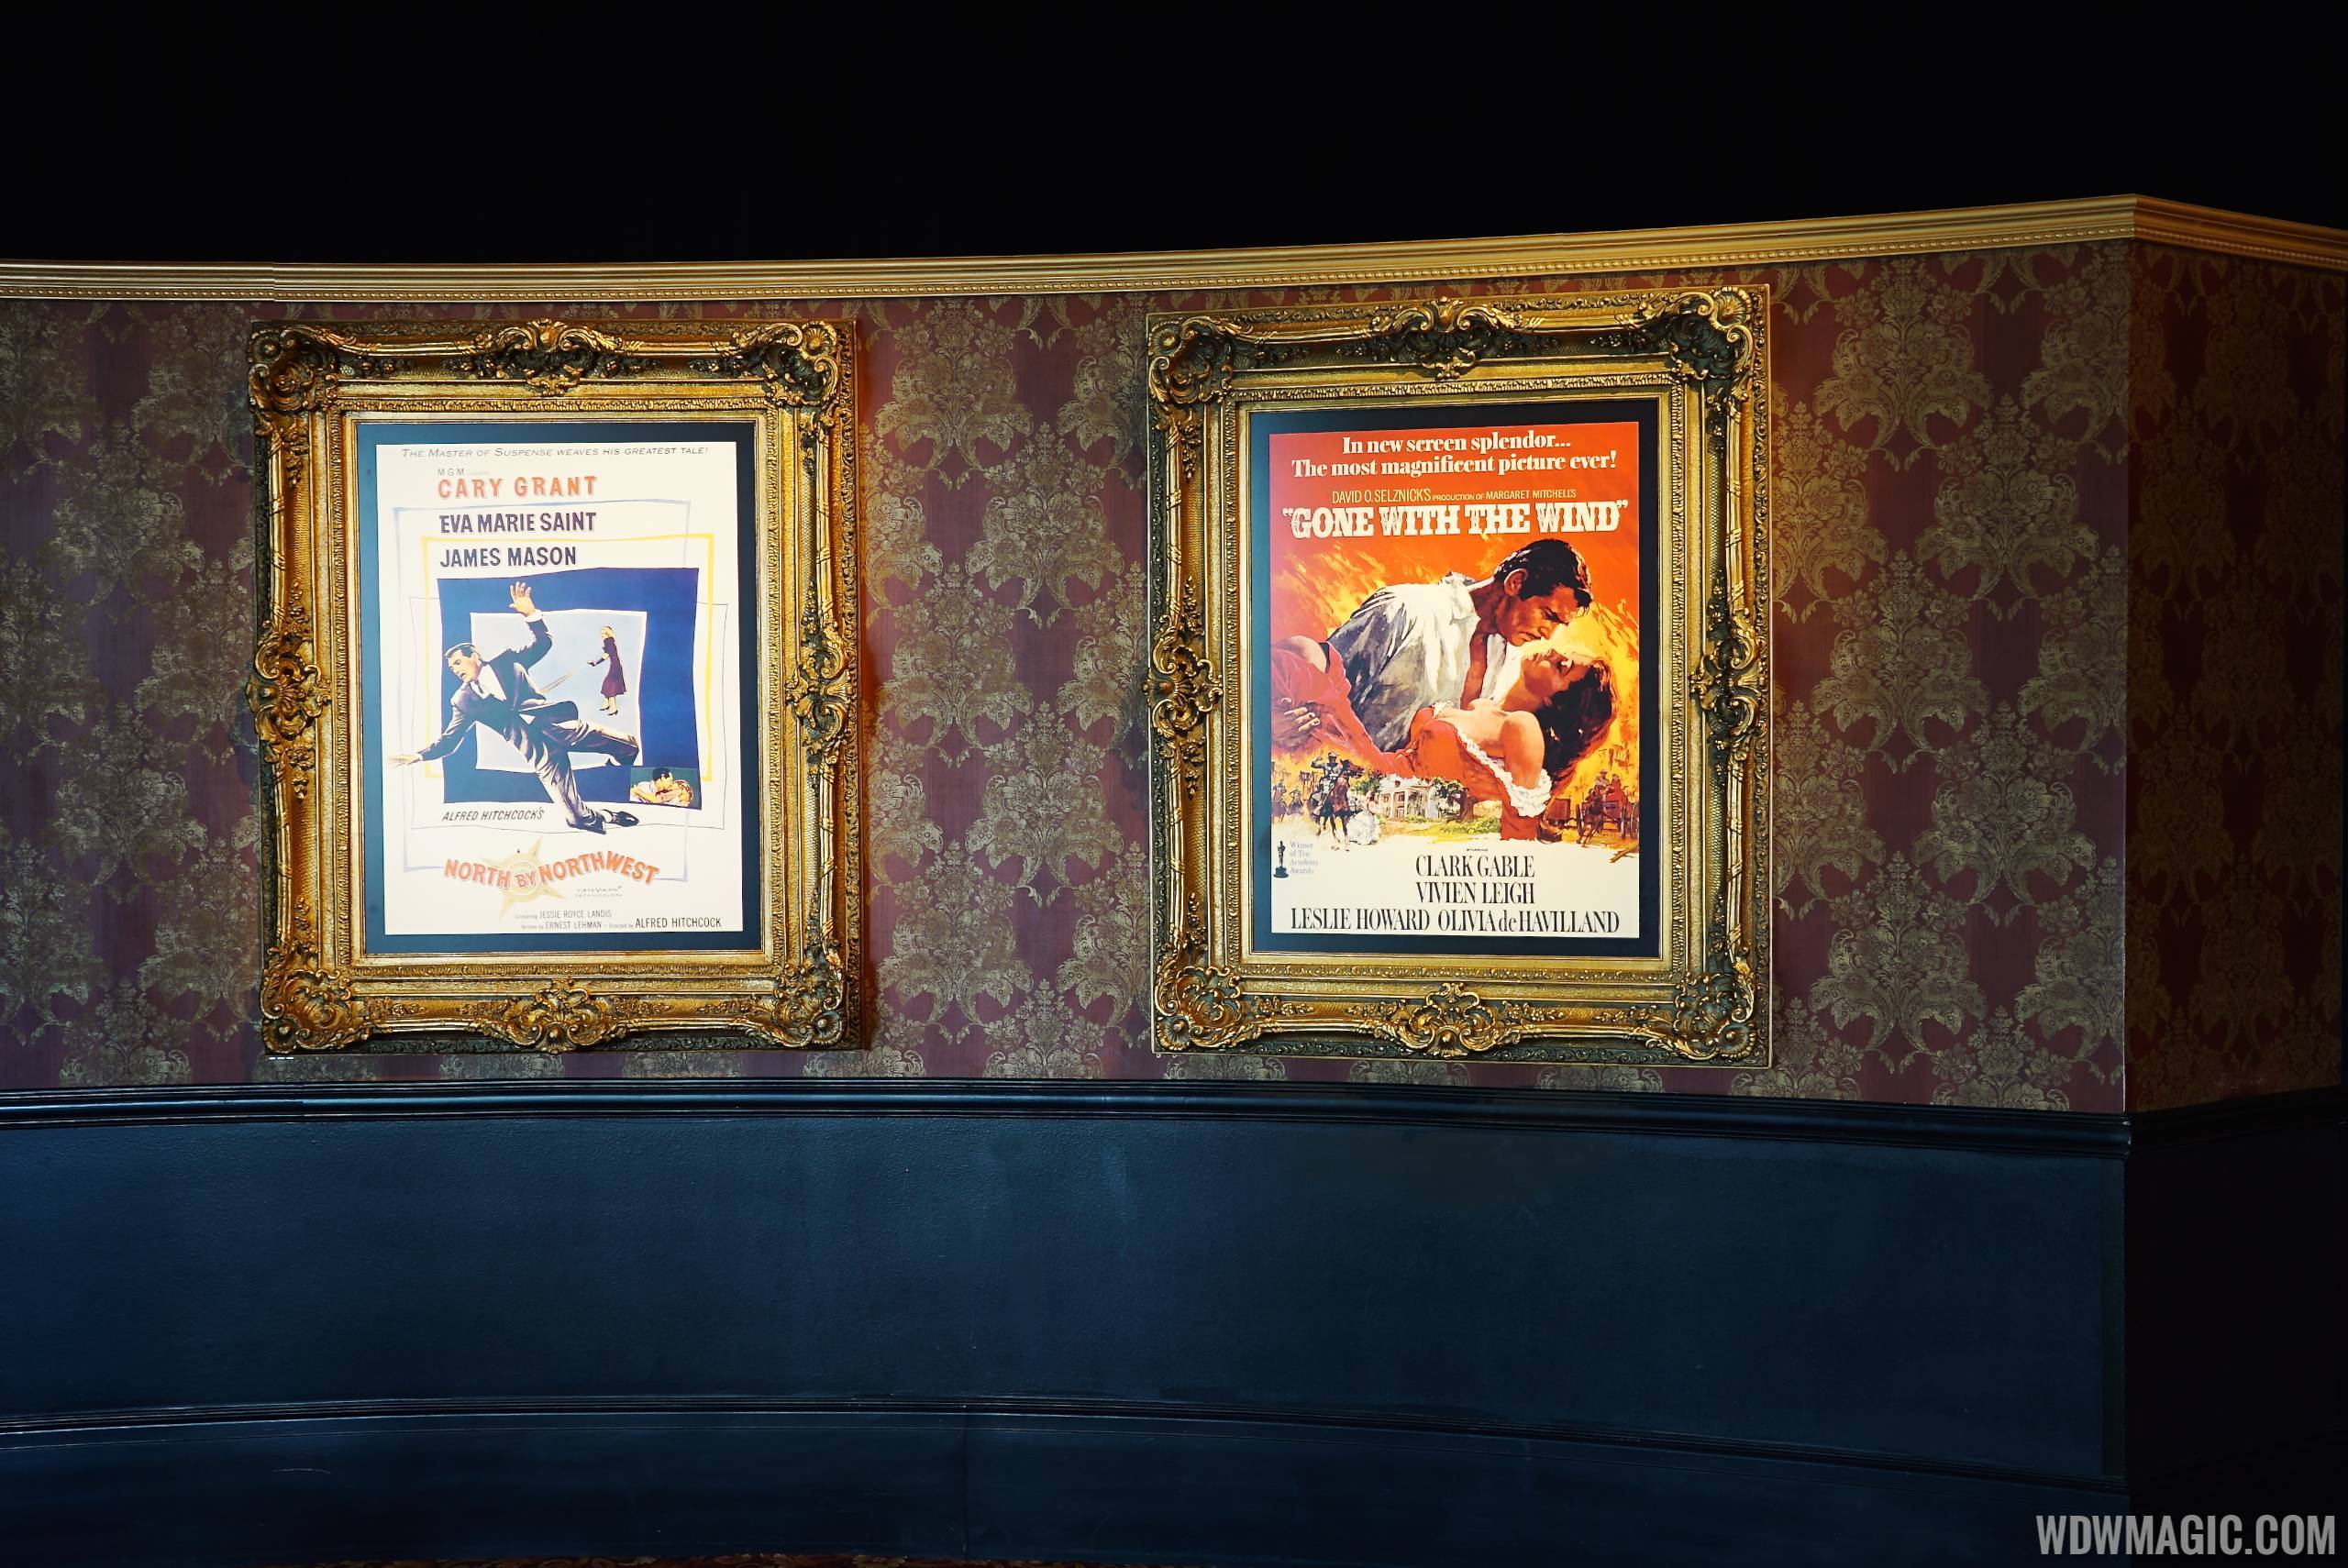 American Film Institute exhibit - North by Northwest and Gone with the Wind posters